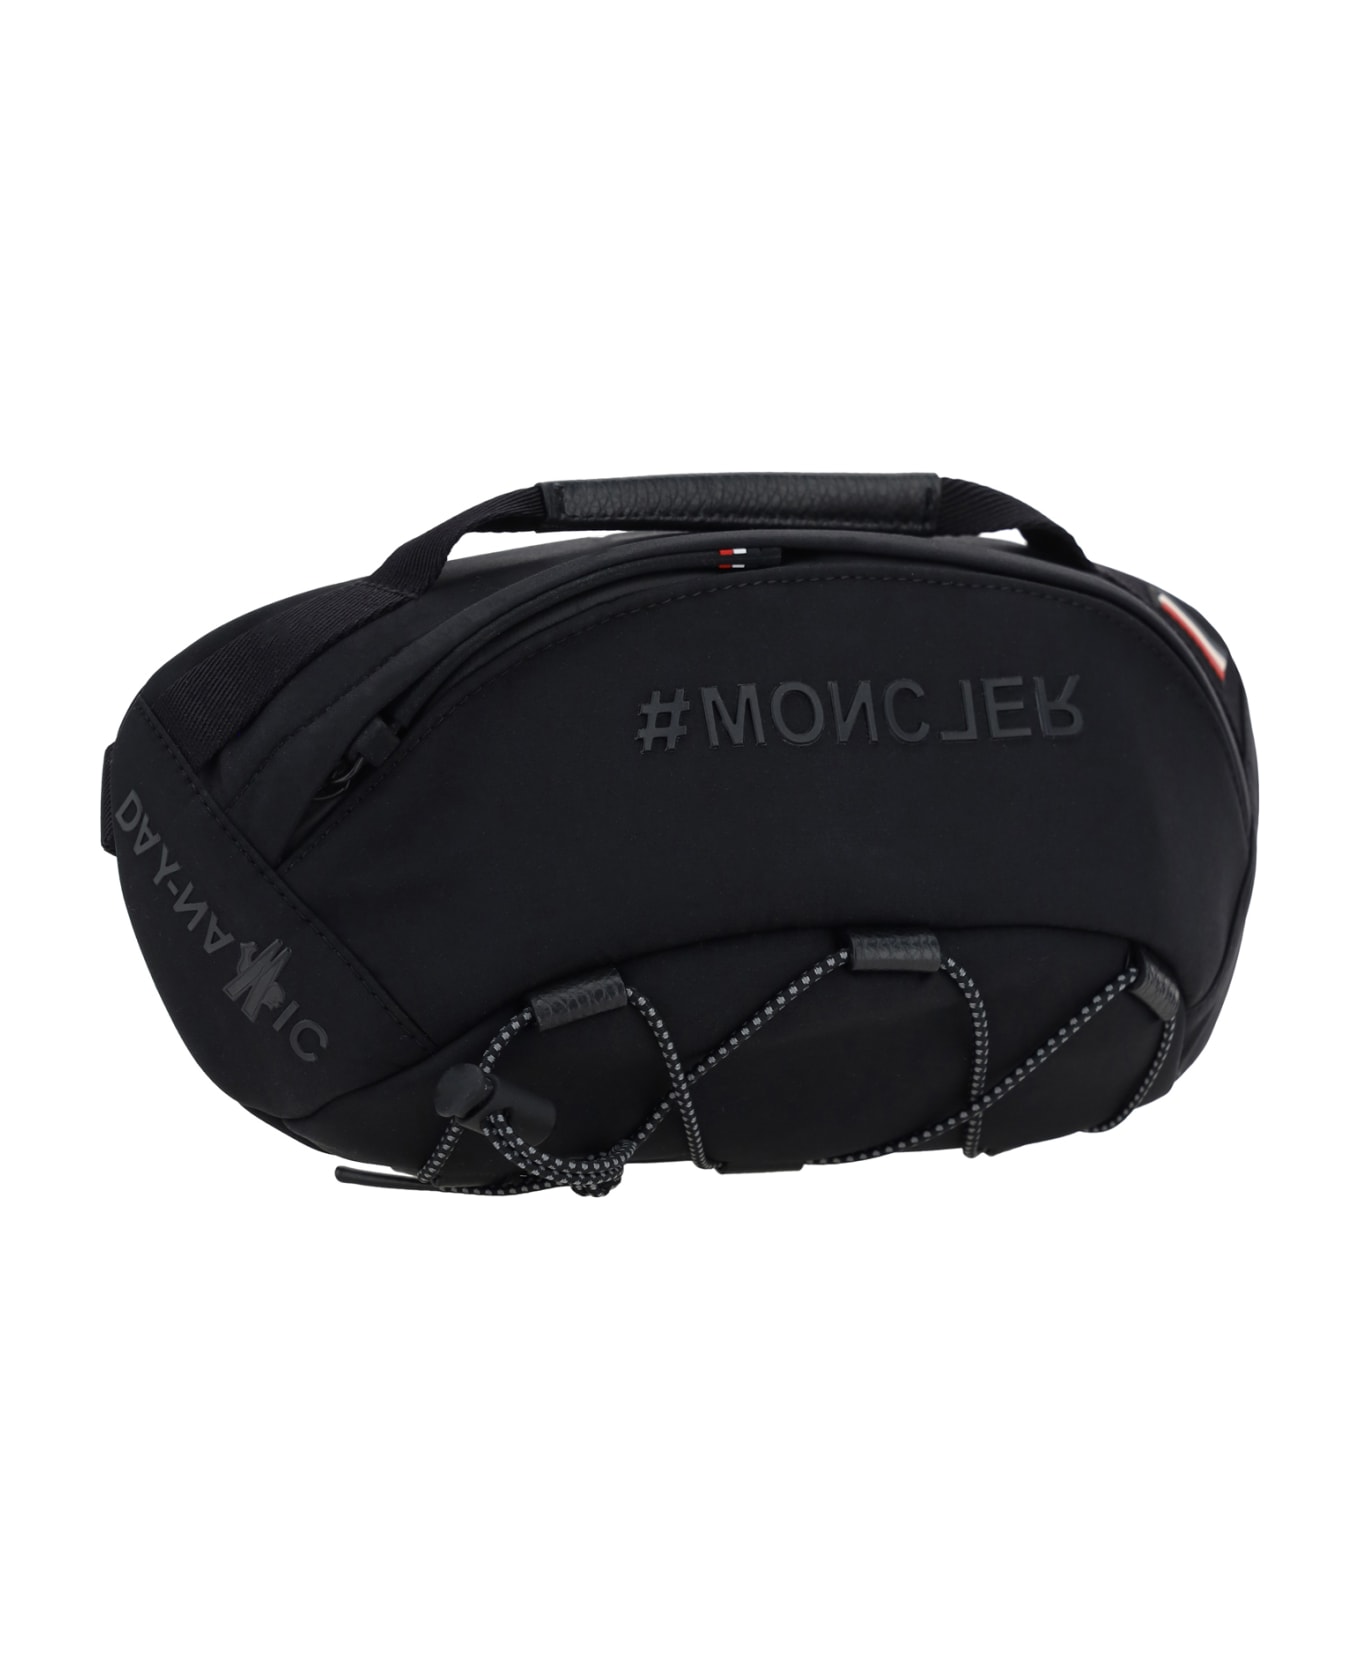 Moncler Grenoble Fanny Pack - 999 バッグ